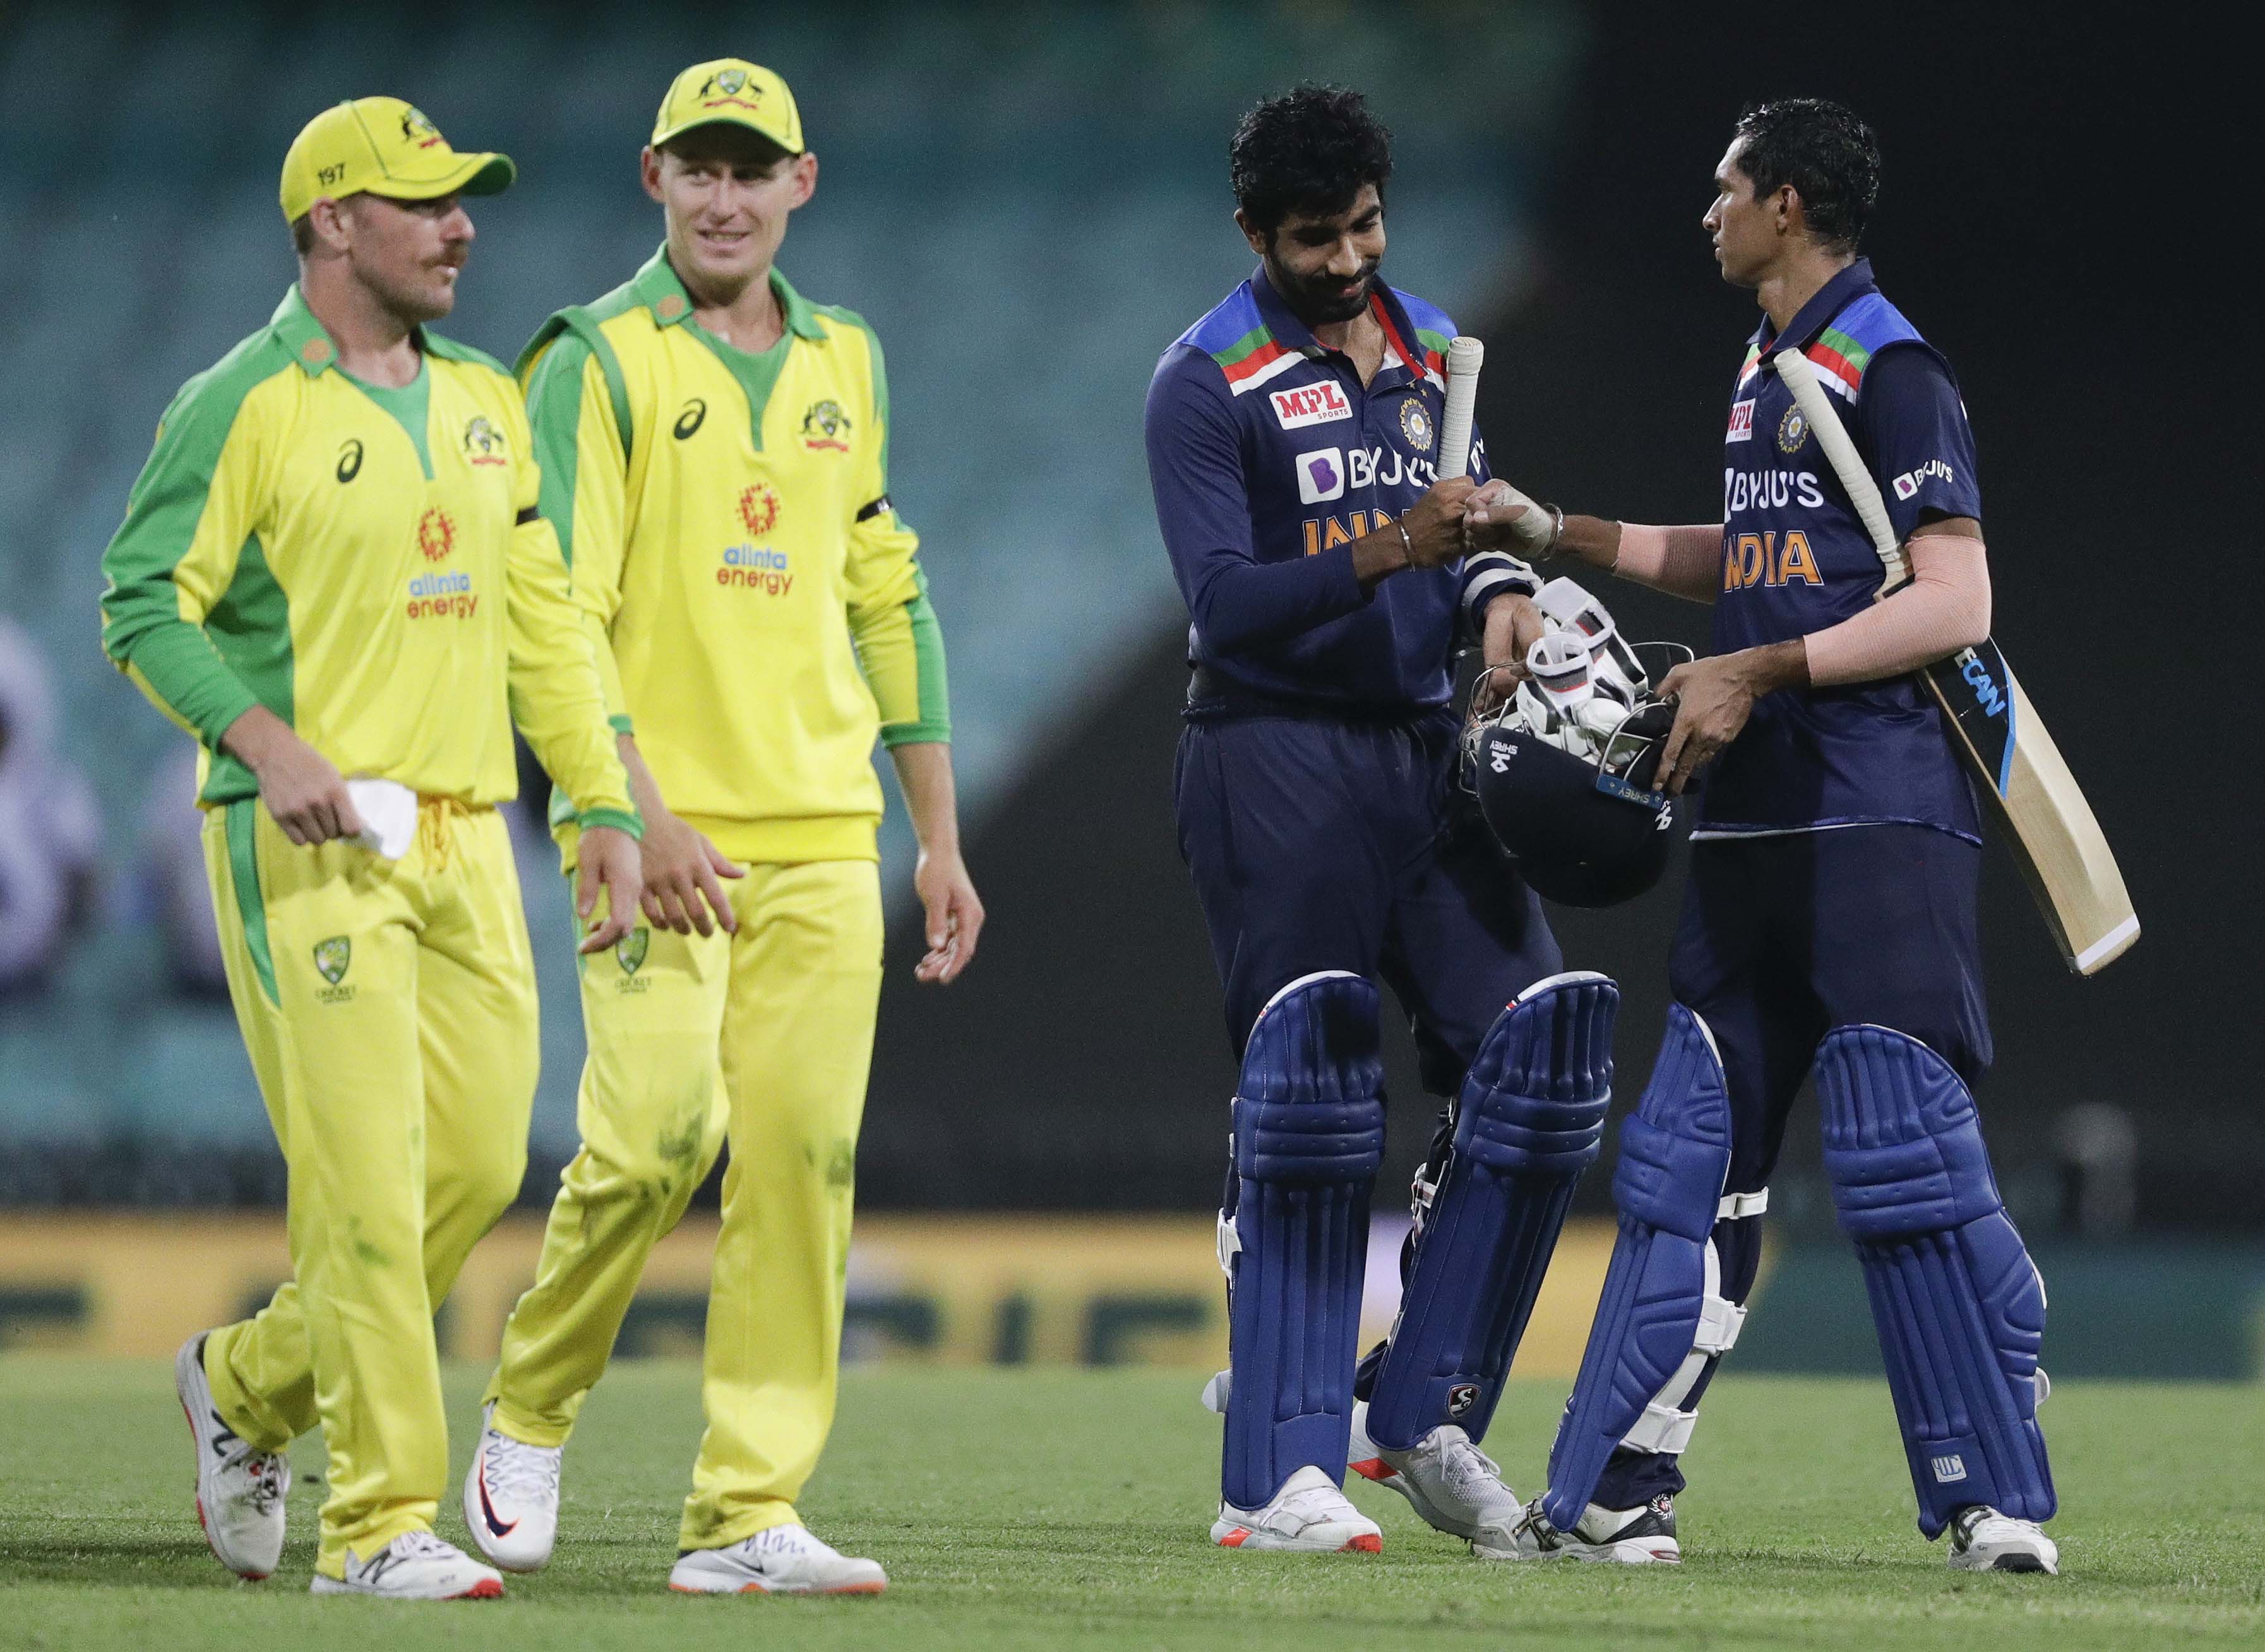 Australia beat India by 66 runs to clinch the first ODI